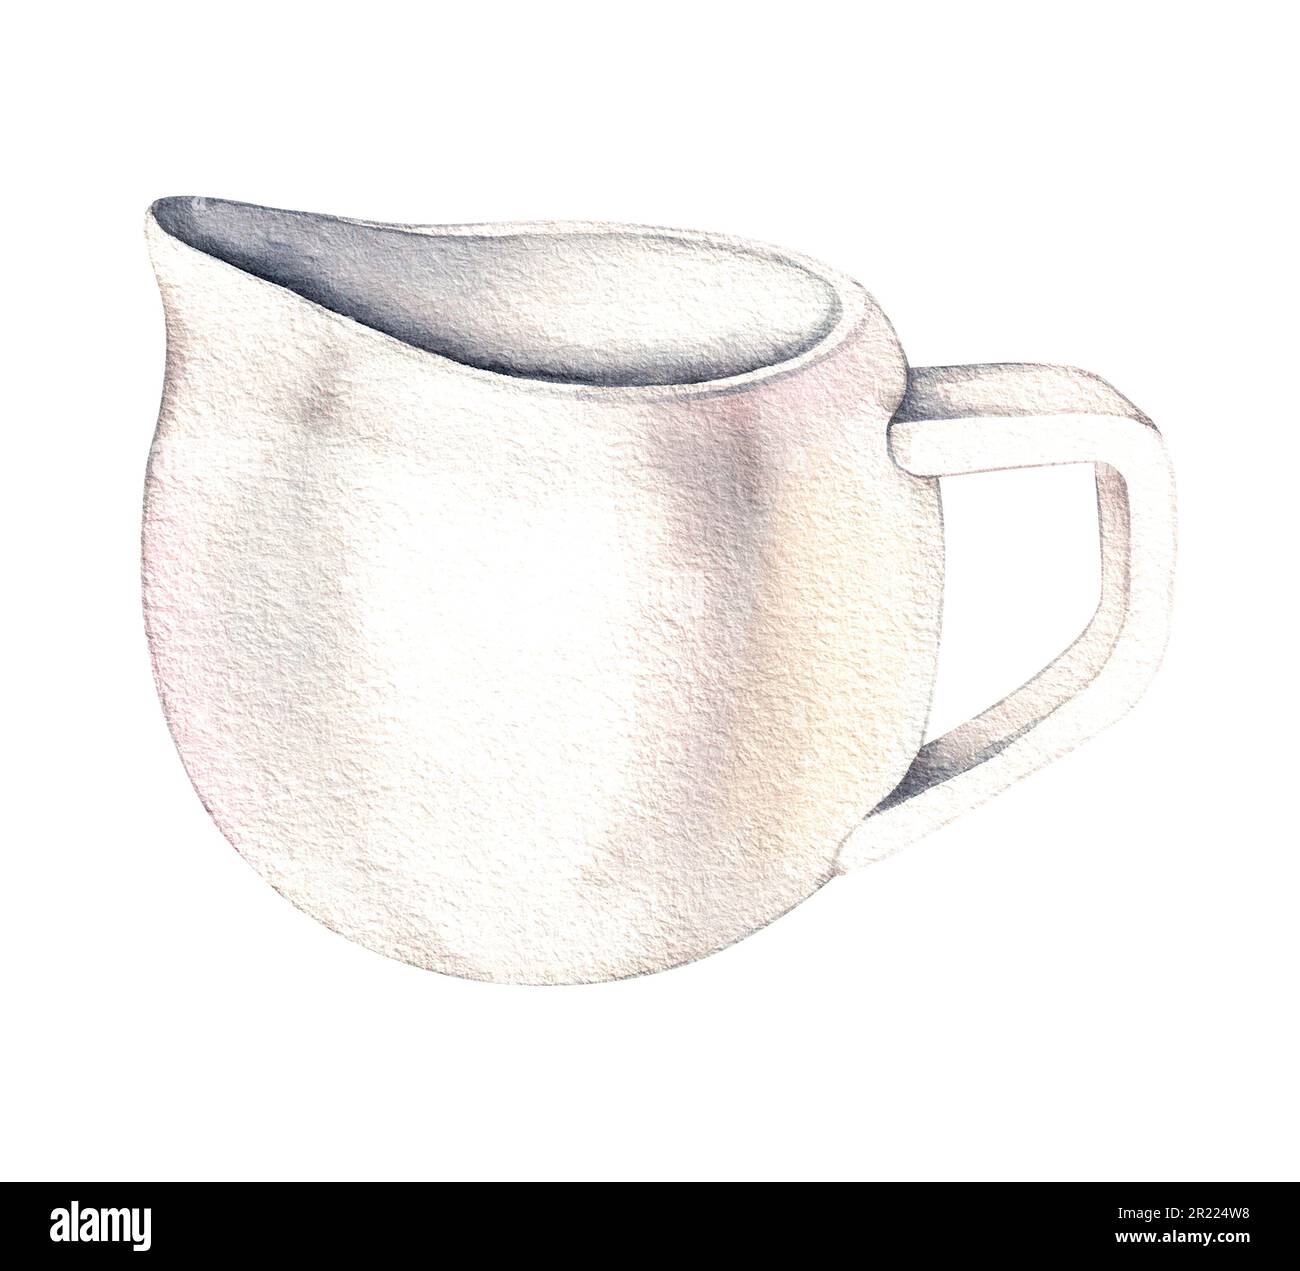 https://c8.alamy.com/comp/2R224W8/watercolor-illustration-of-a-white-ceramic-milk-jug-on-a-white-background-isolated-for-the-design-of-cards-packaging-logos-etc-2R224W8.jpg